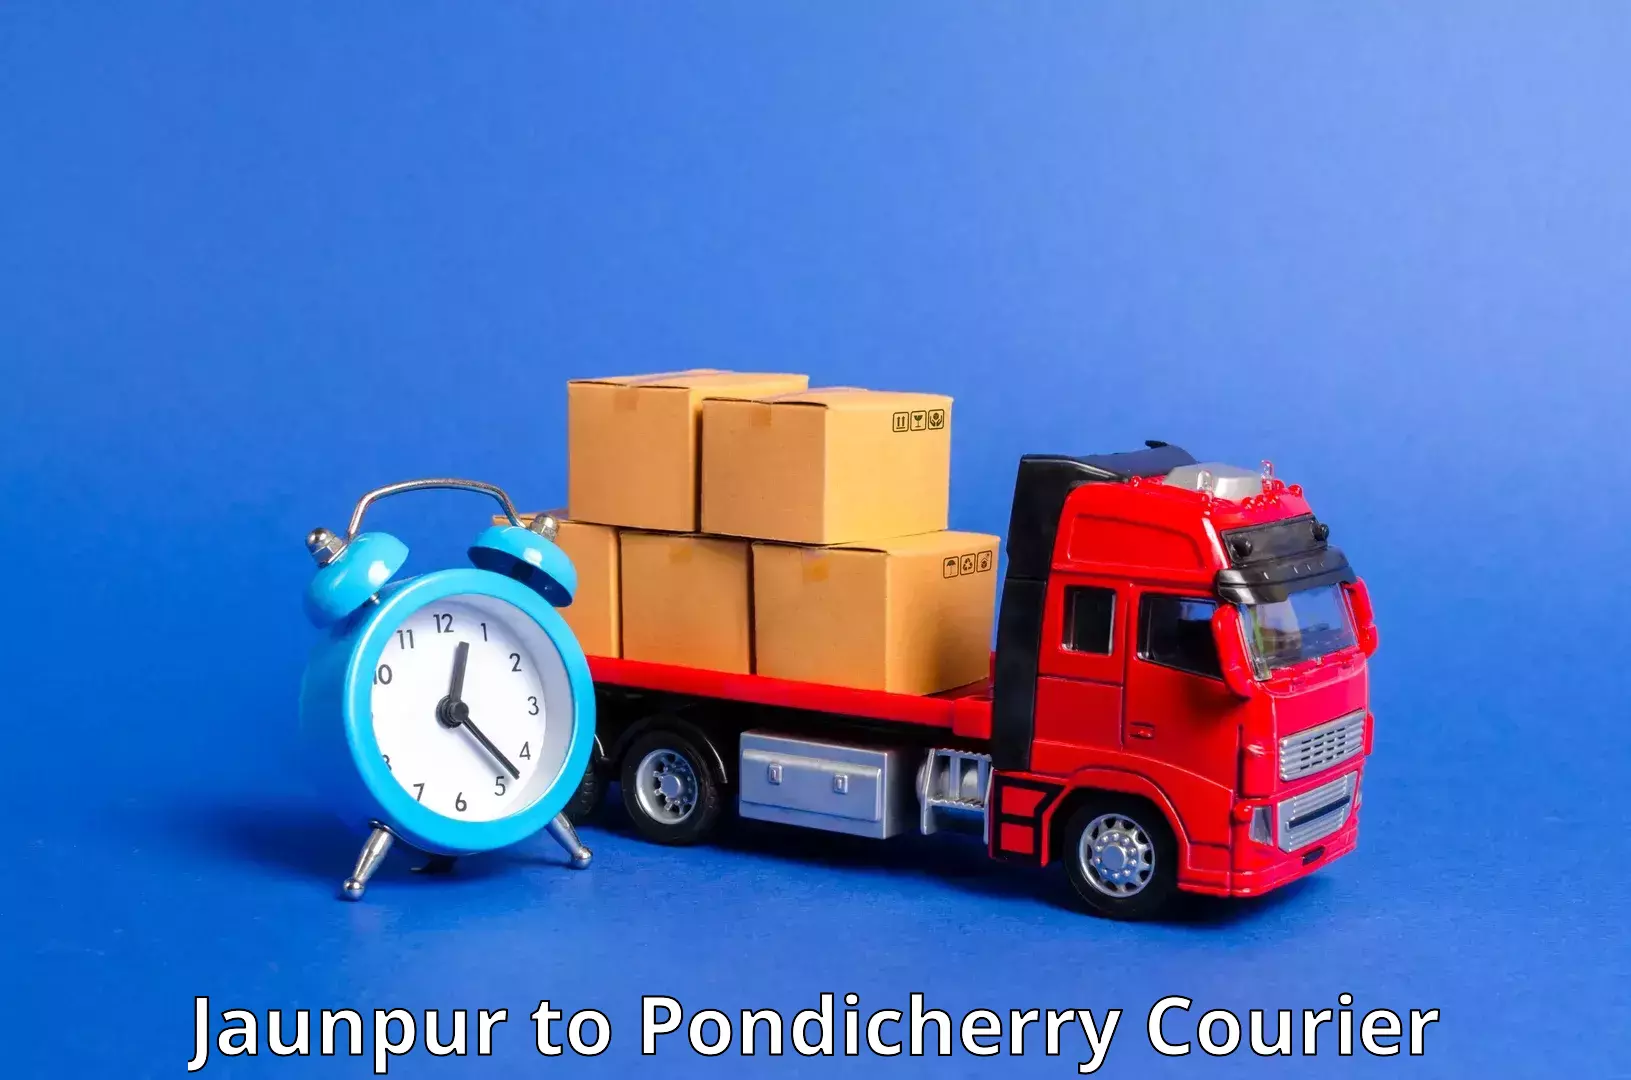 Business delivery service Jaunpur to Pondicherry